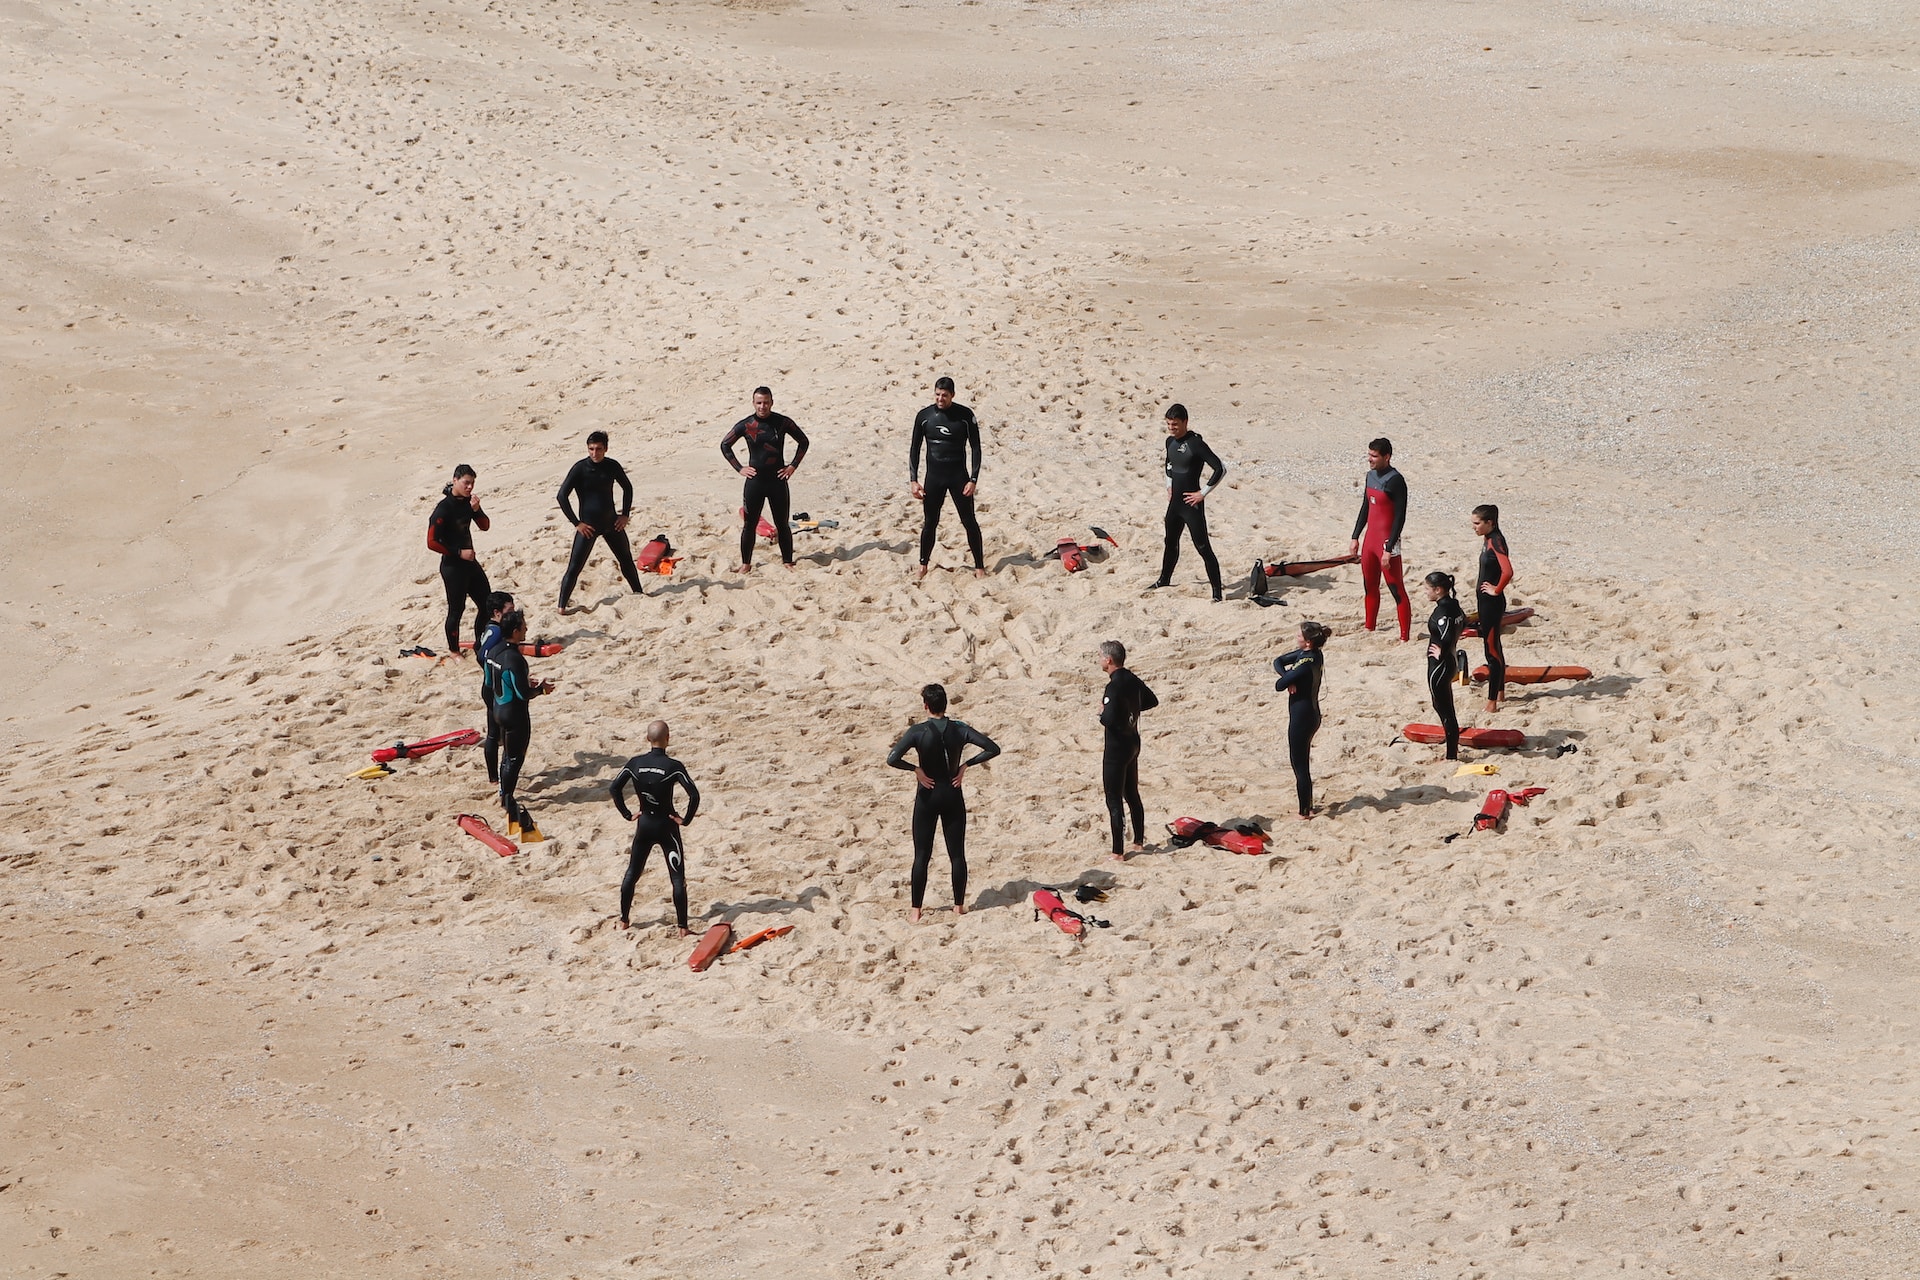 the image shows swimmers standing in the circle at the beach 